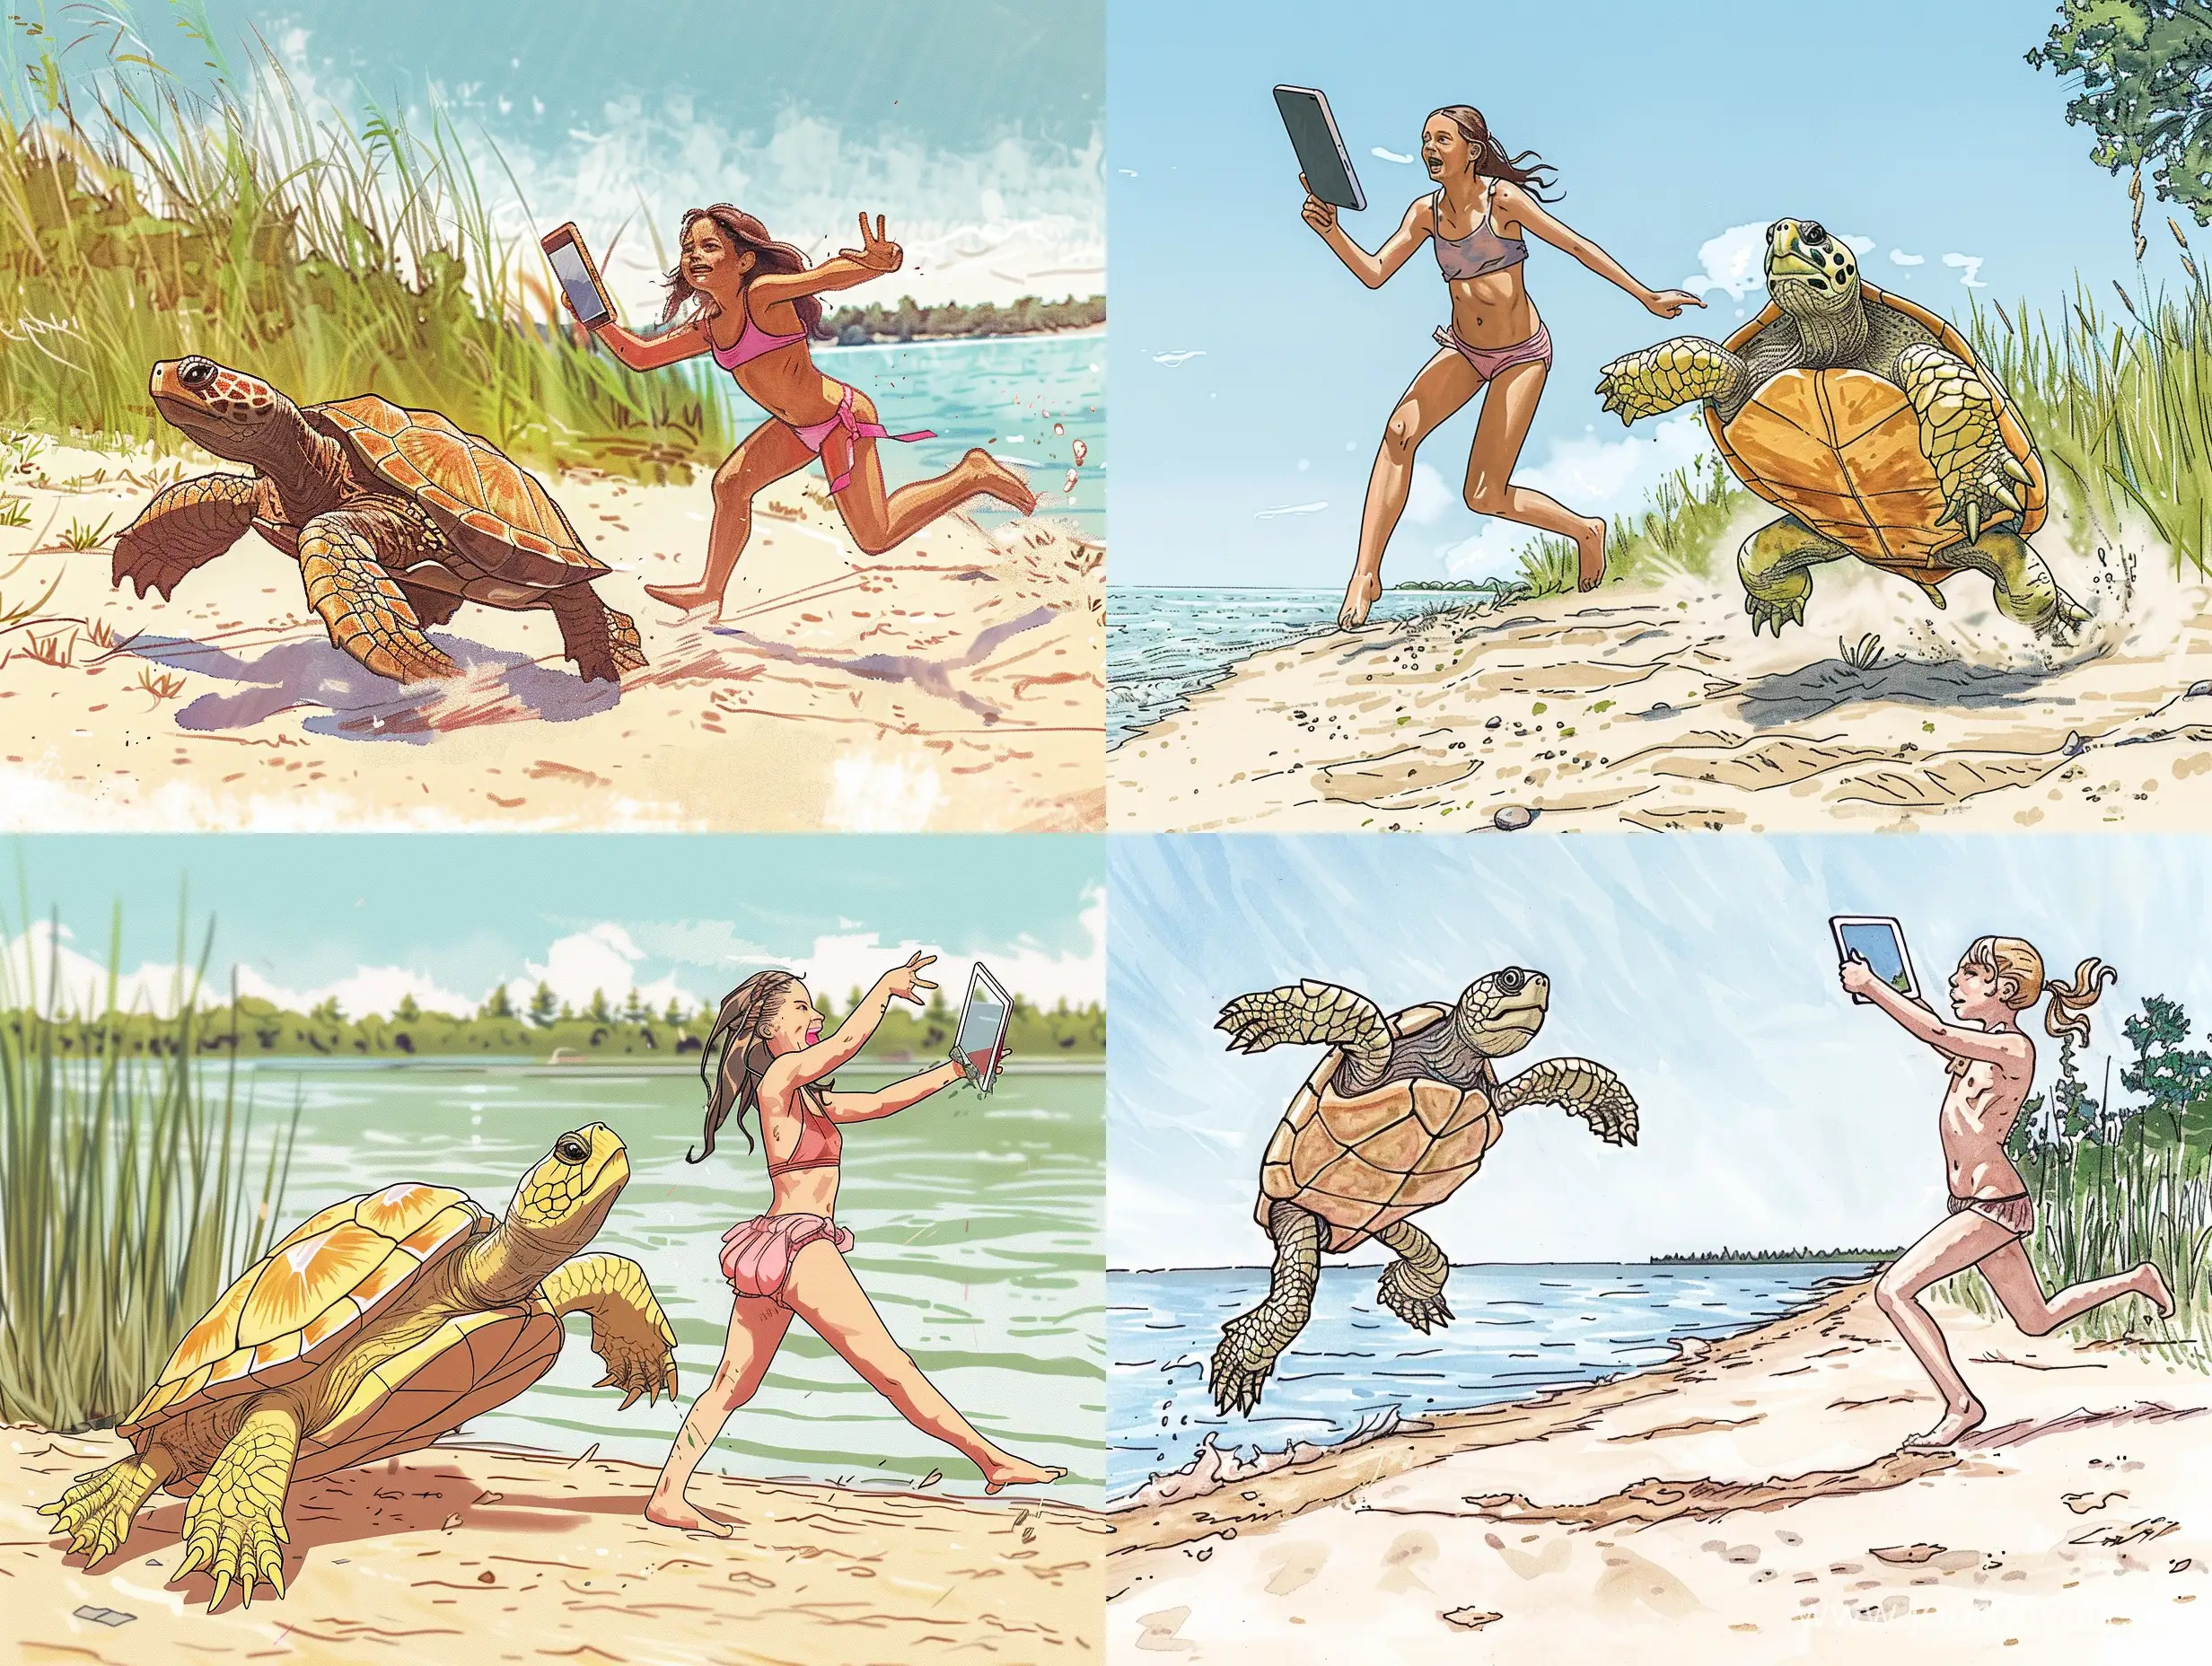 Adventurous-Girl-Capturing-Turtle-Sprint-by-the-Lake-Shore